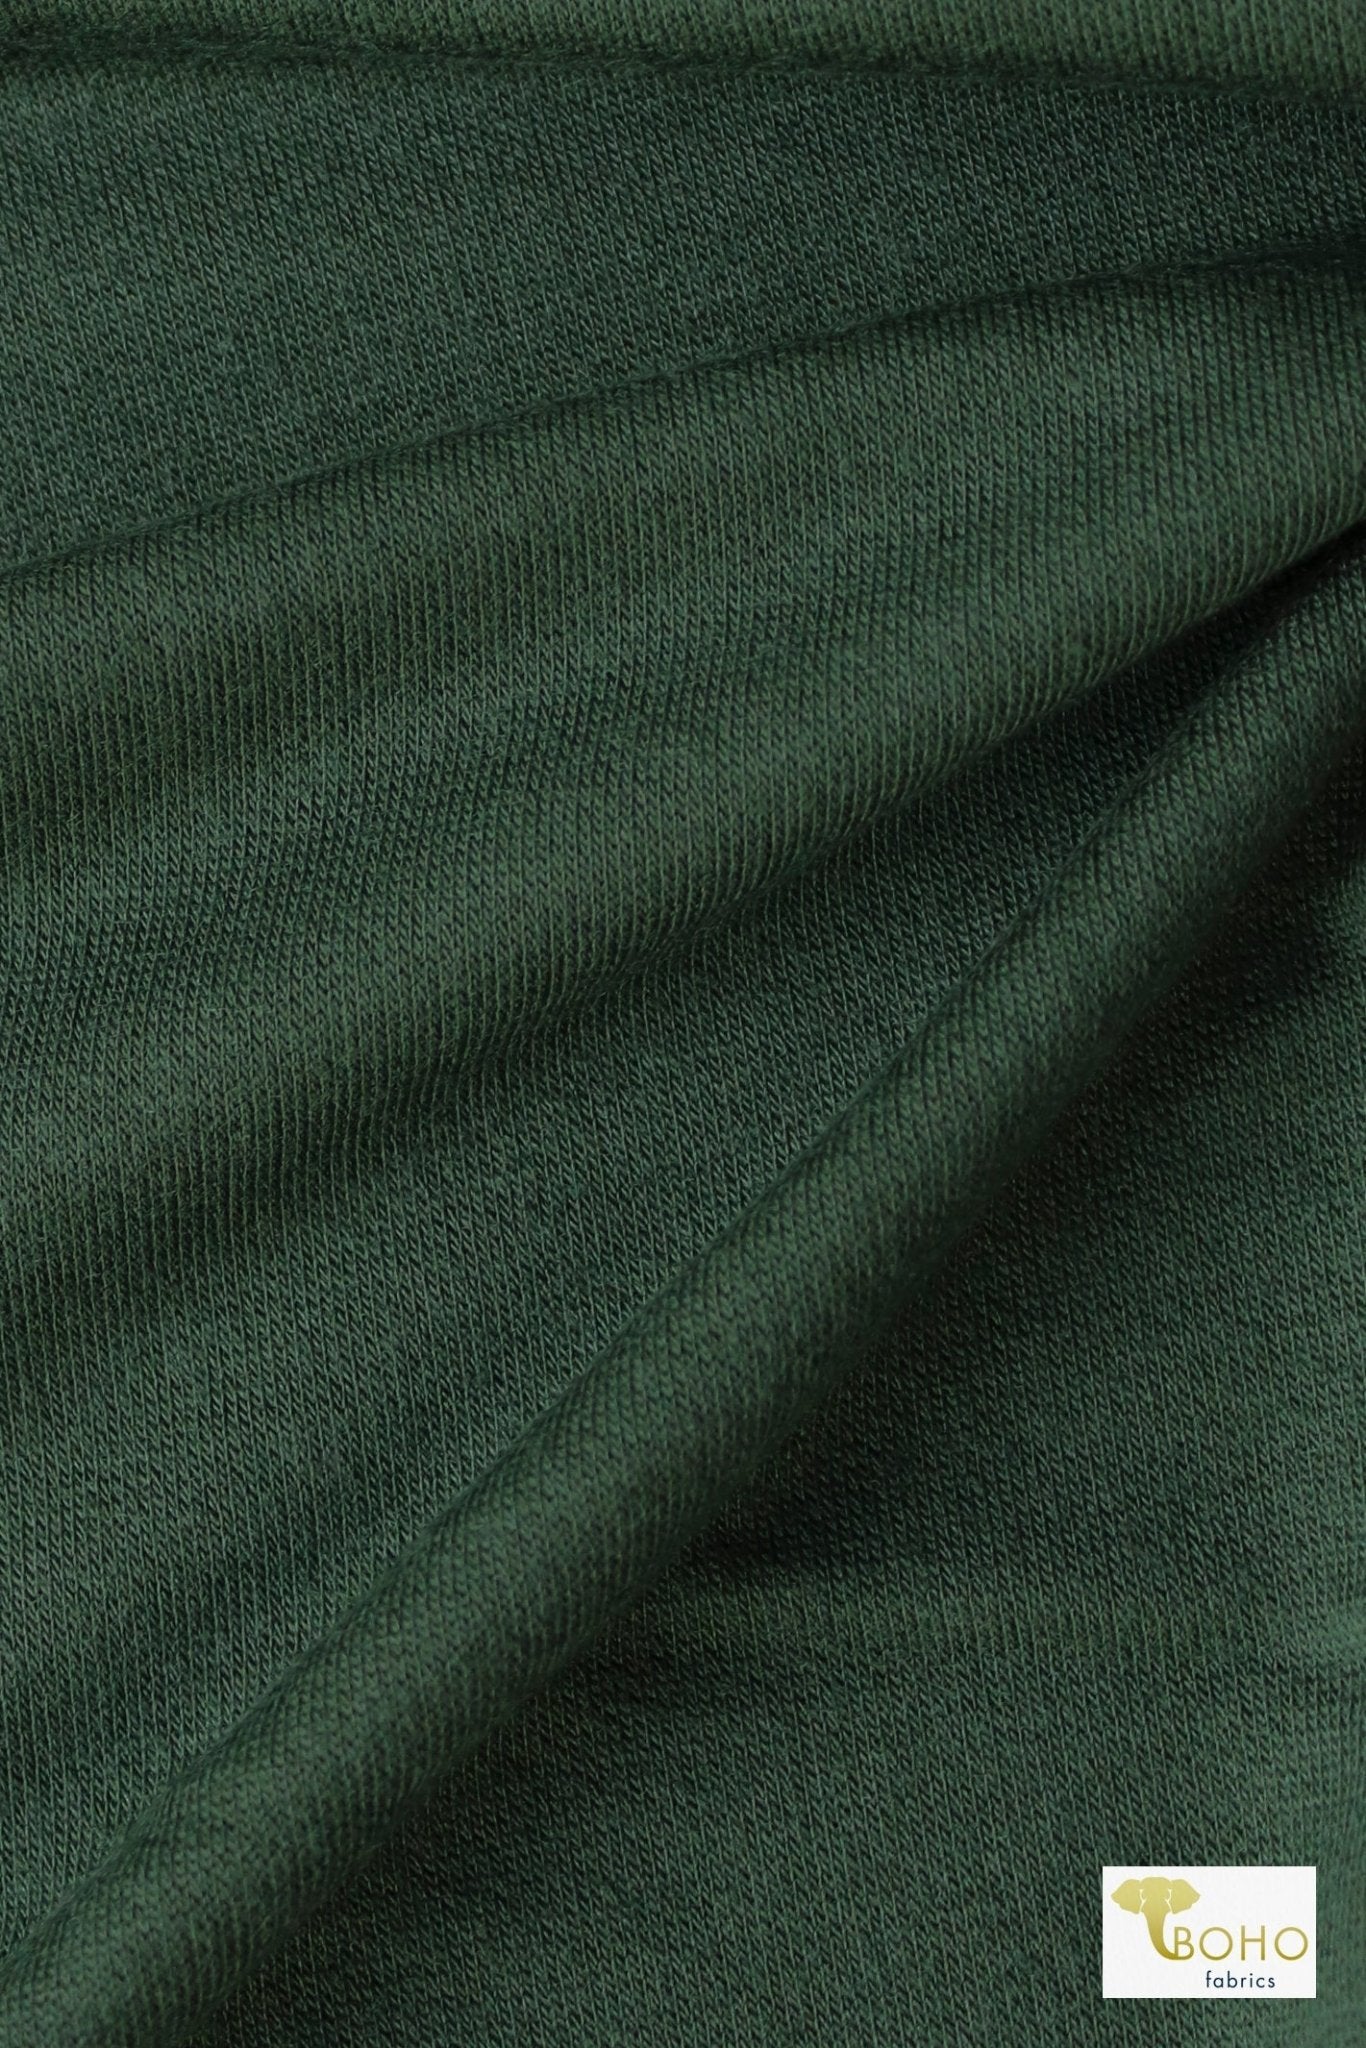 Iced Pine Green, Modal Solid French Terry Knit - Boho Fabrics